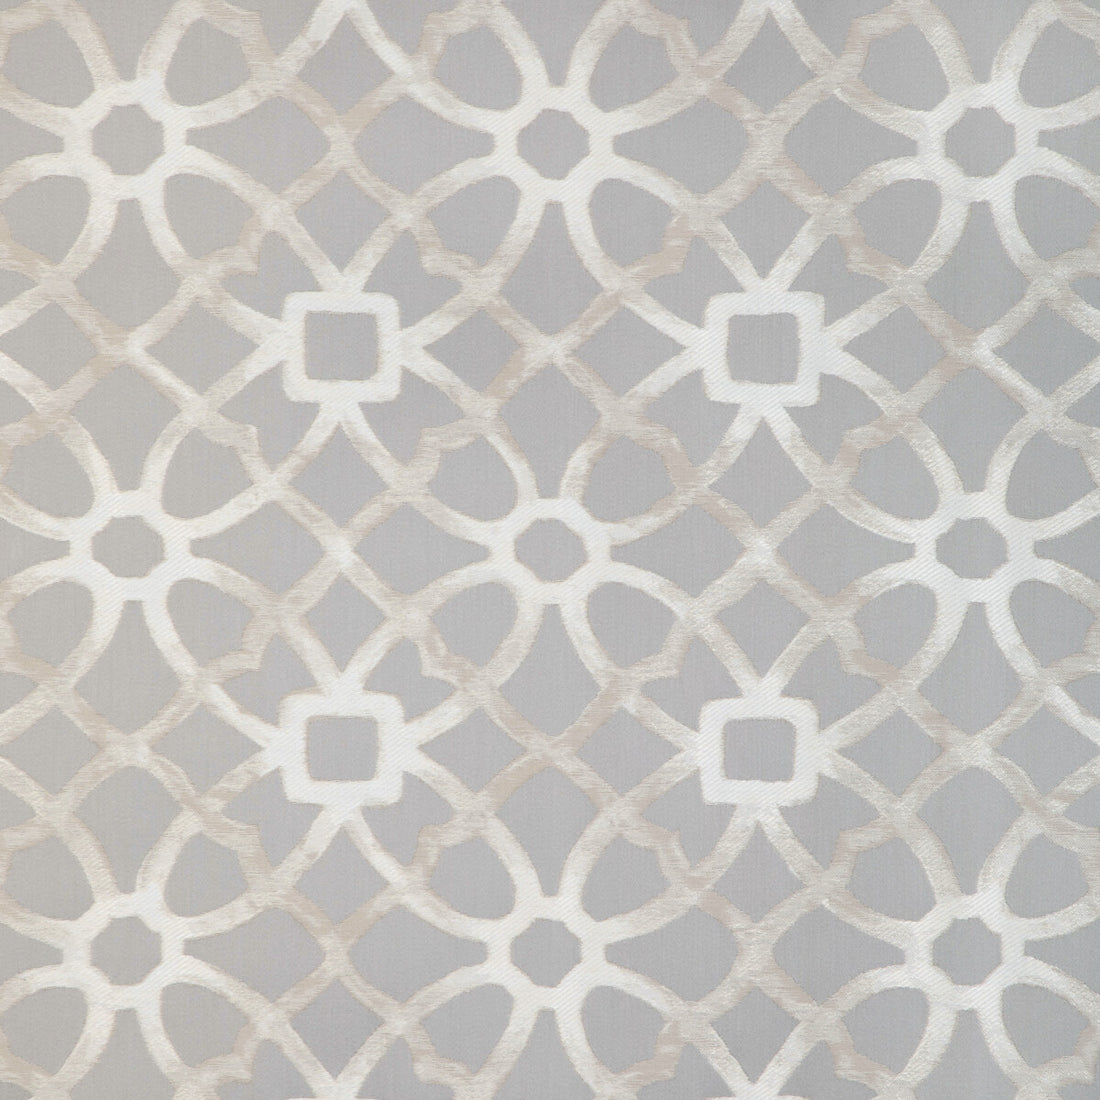 New Zuma fabric in silver color - pattern 36788.11.0 - by Kravet Design in the Candice Olson collection